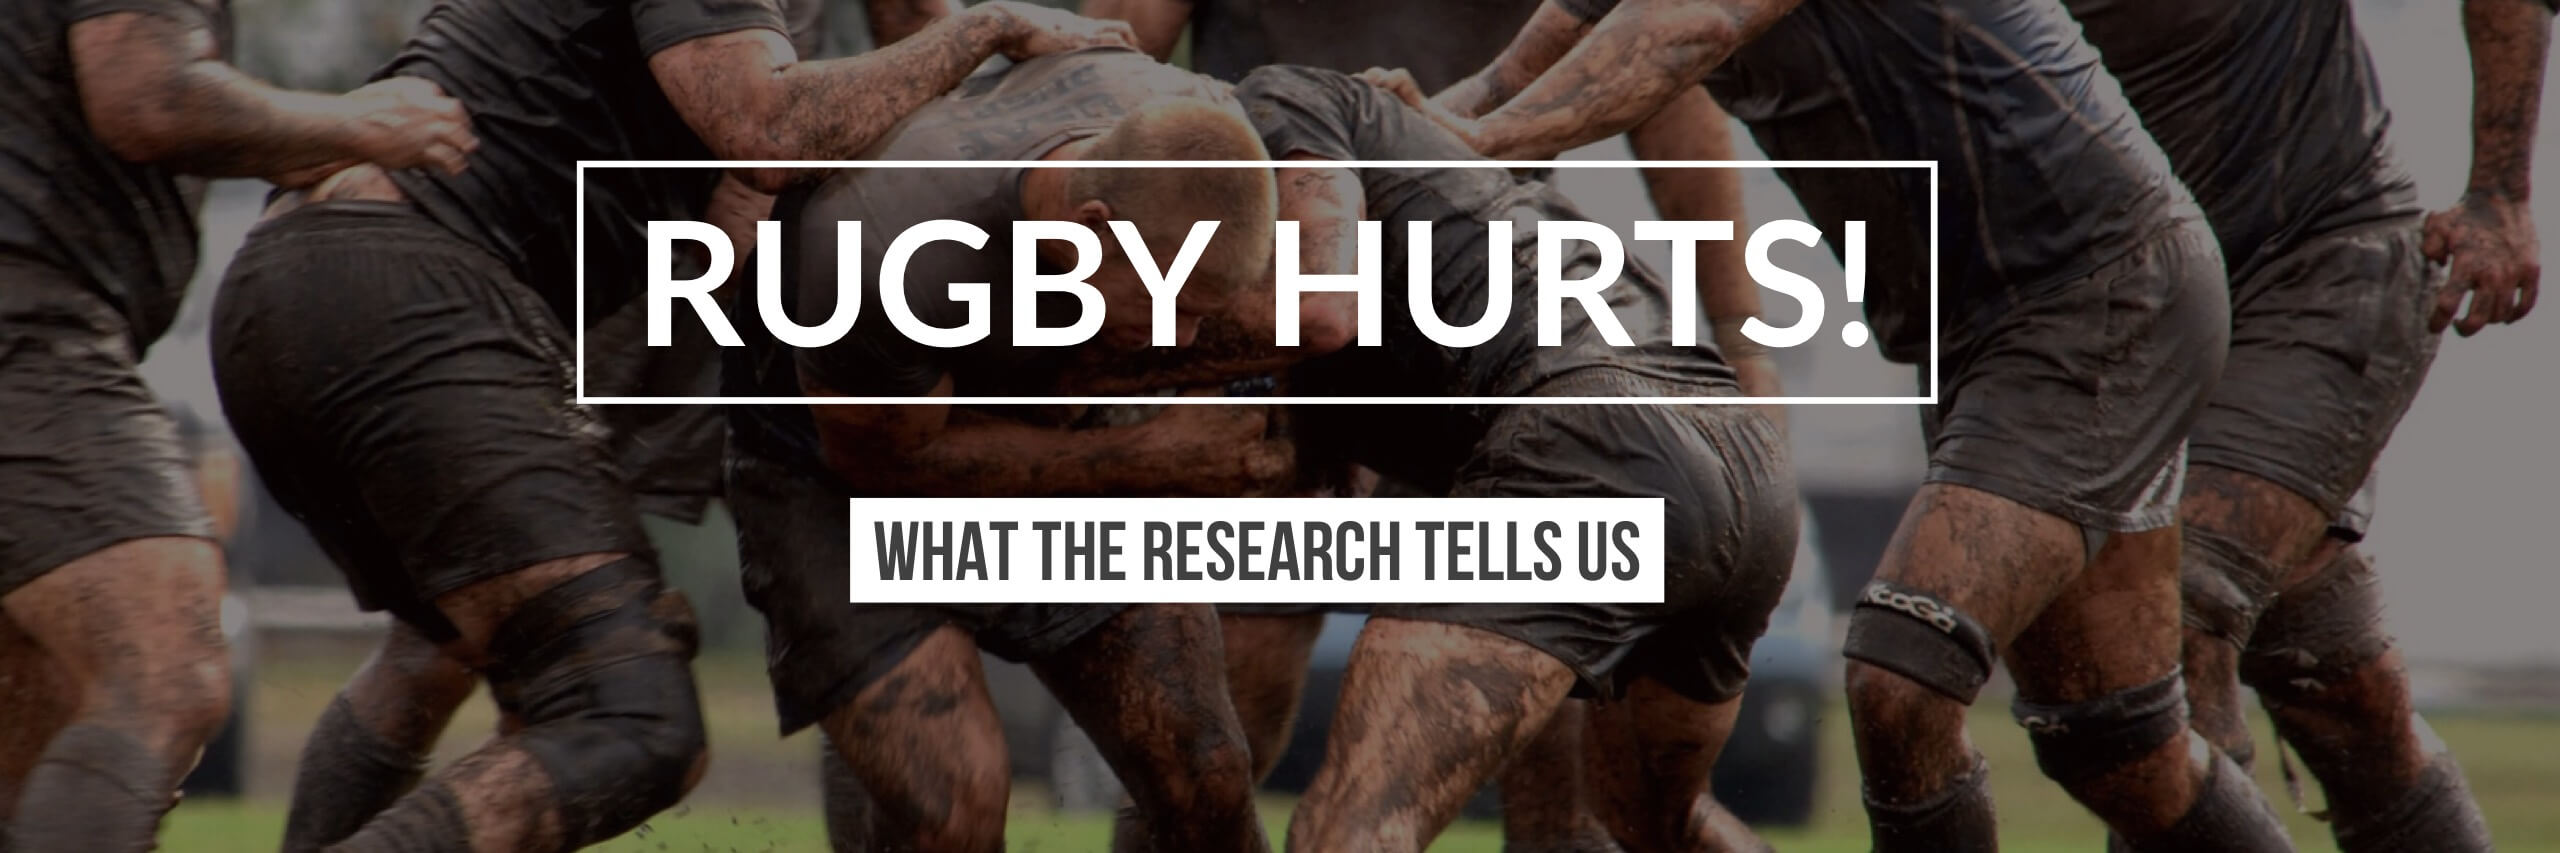 southfields physiotherapy rugby hurts